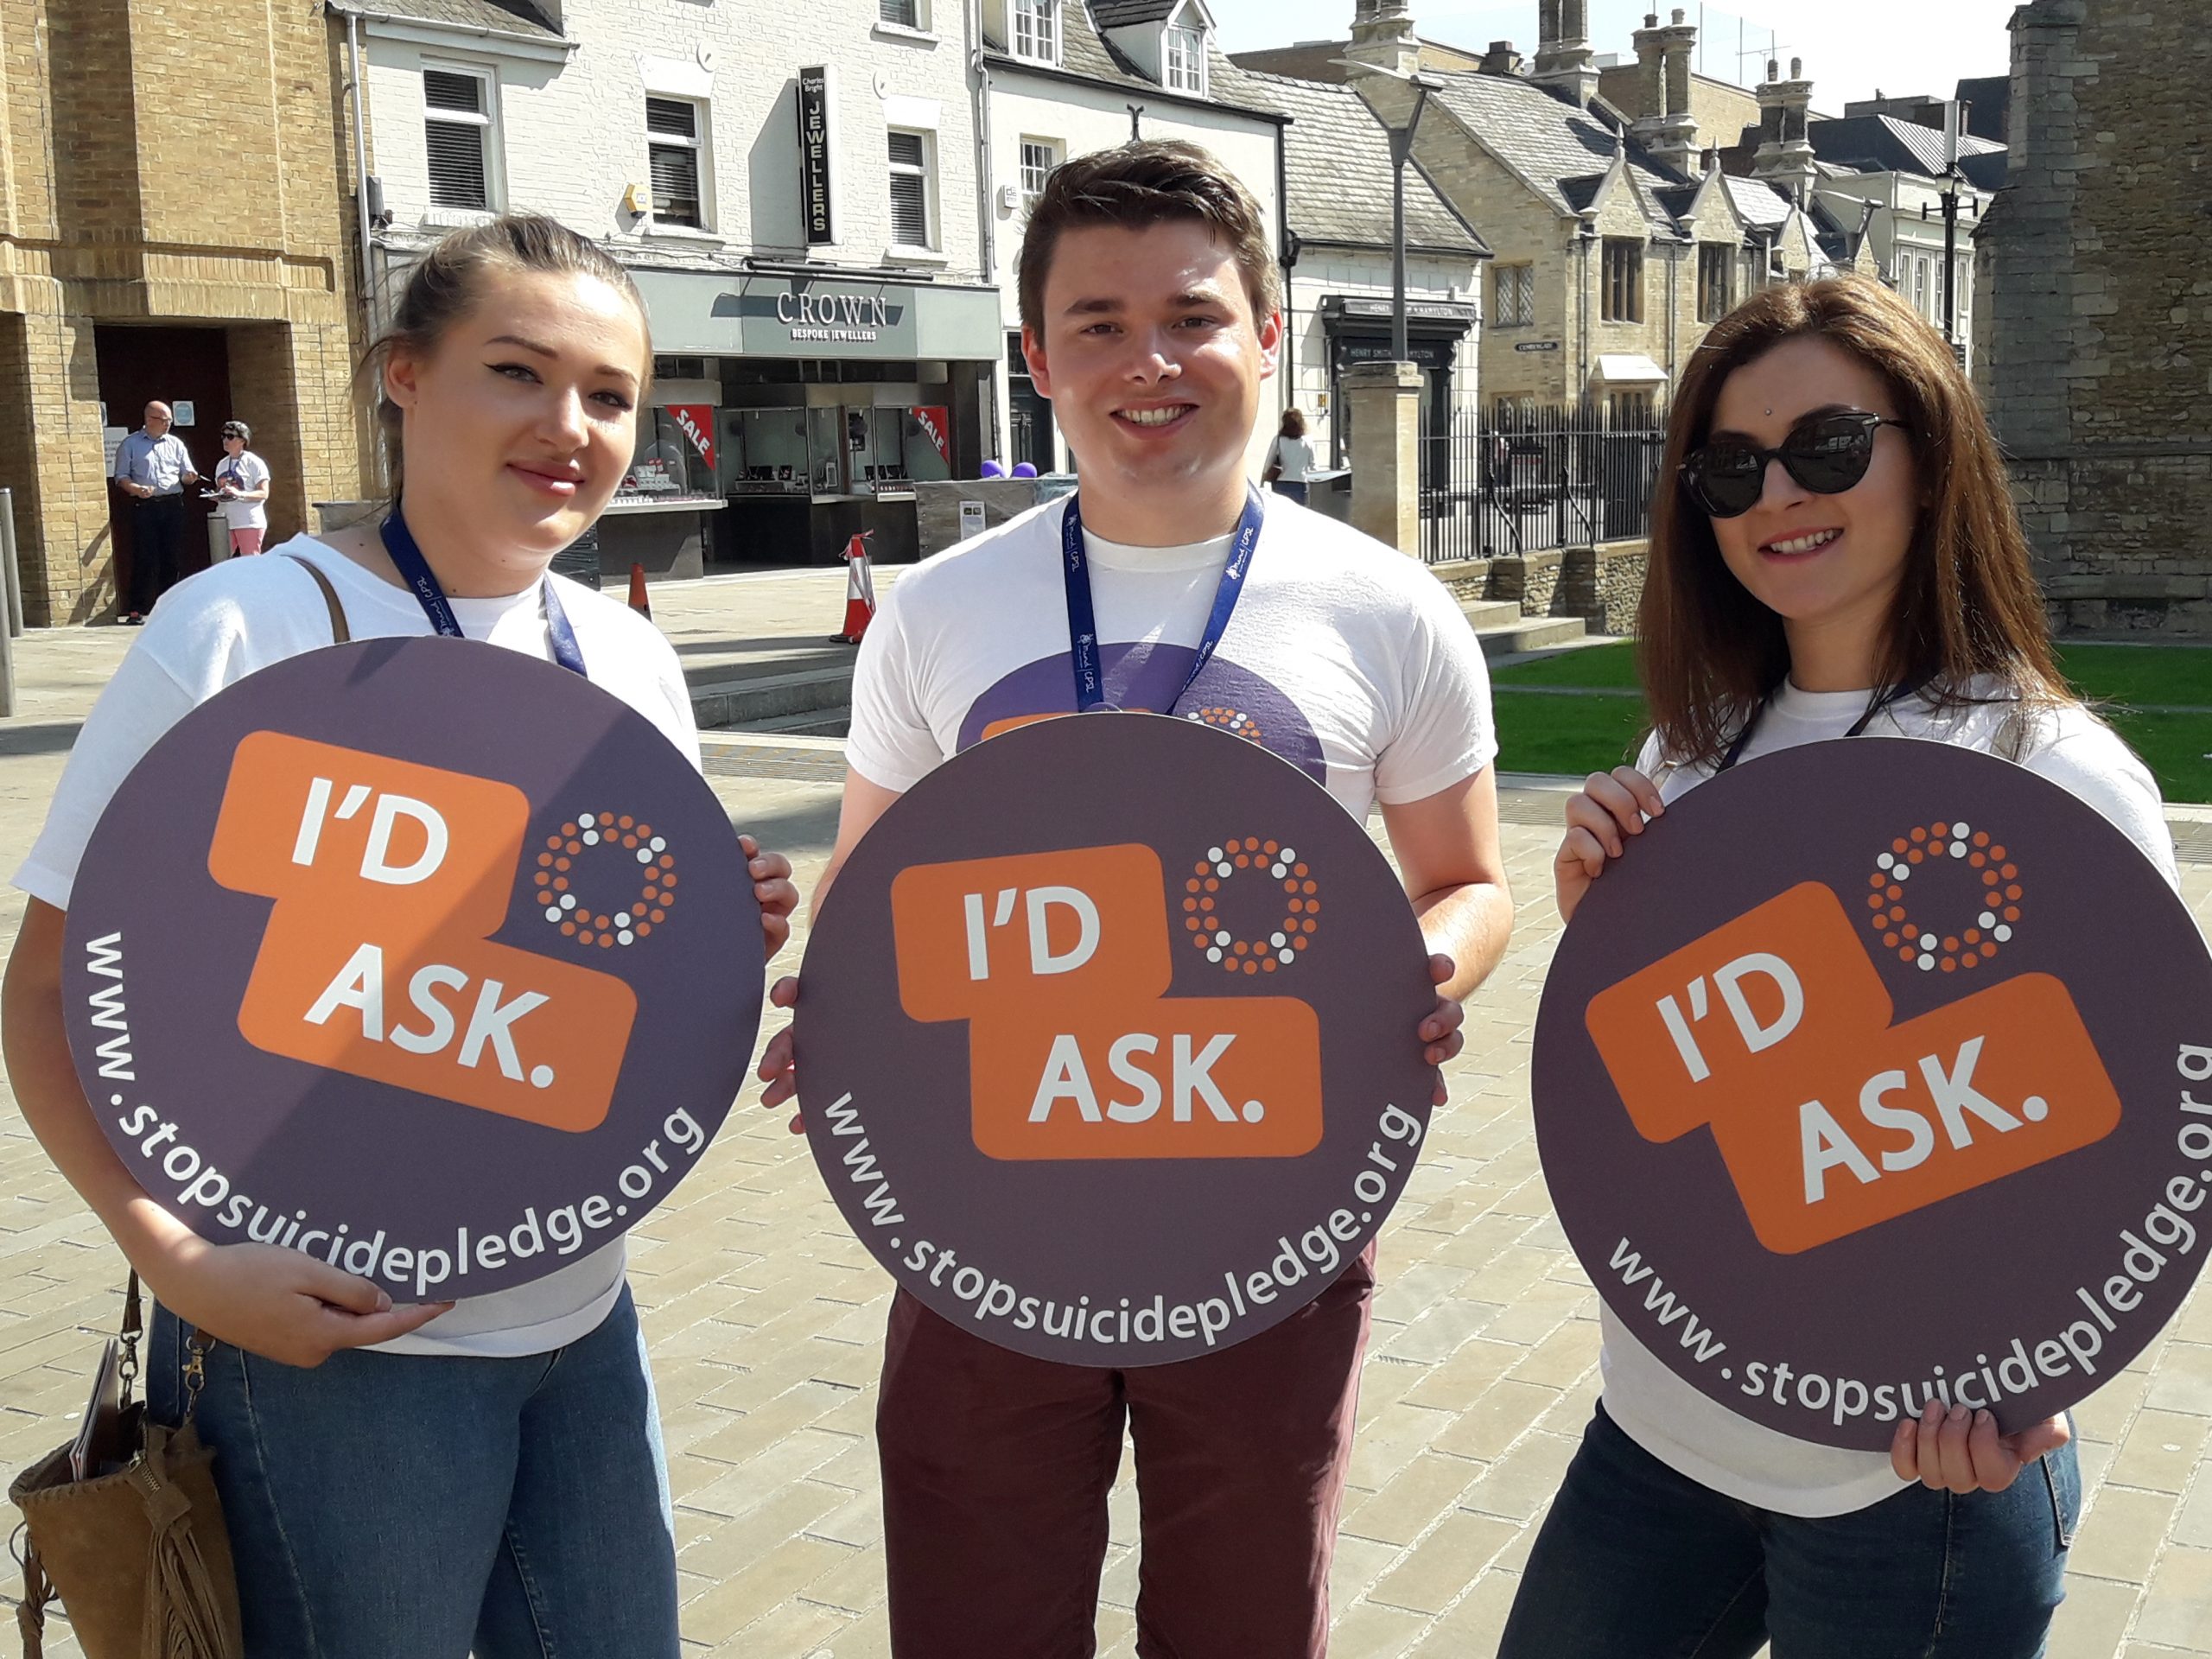 Three people holding the I'd Ask sign